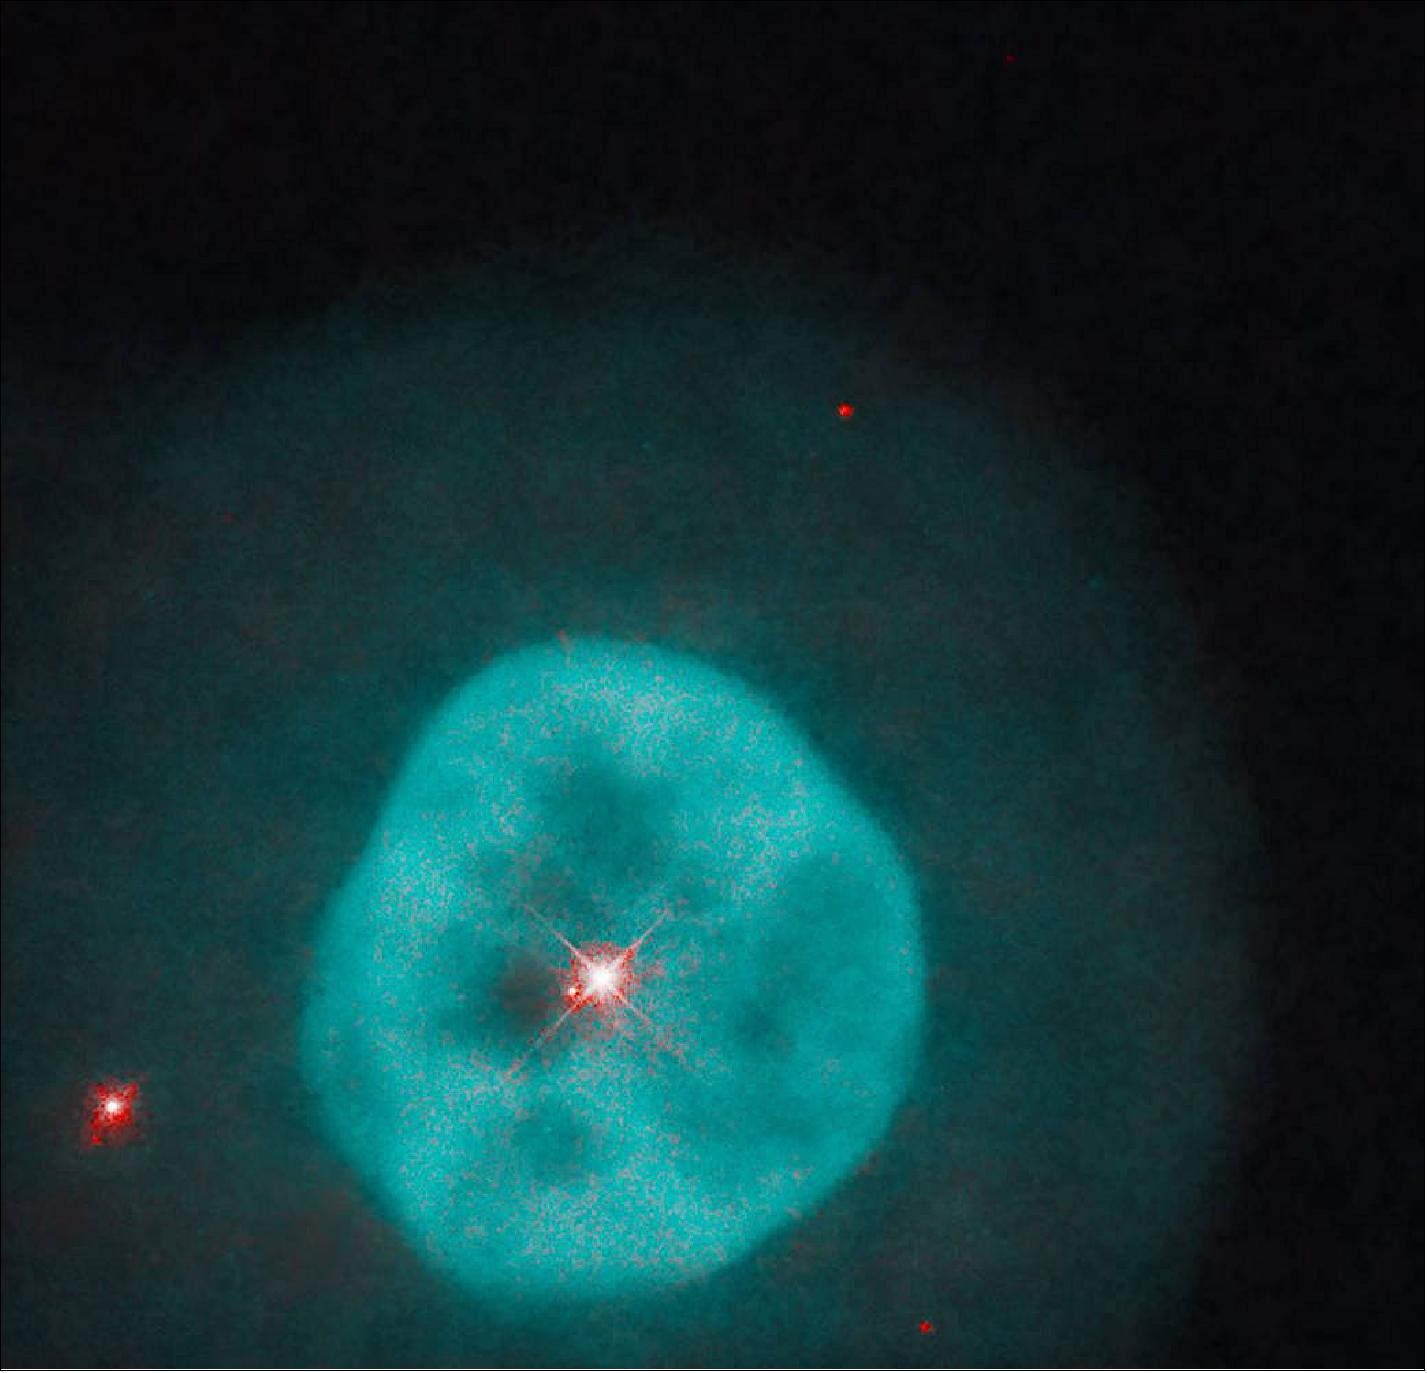 Figure 32: Hubble observed this nebula as part of a study of over 100 planetary nebulae with nearby stars. The proximity of the stars indicated a possible gravitational connection between the nearby stars and the central stars of the nebulae. Observations of the distance between NGC 1535’s central star and its possible companion suggest that Cleopatra’s Eye is indeed part of a gravitationally bound binary star system.[image credit: NASA, ESA, and H. Bond and R. Ciardullo (Pennsylvania State University), et. al.; Processing: Gladys Kober (NASA/Catholic University of America)]